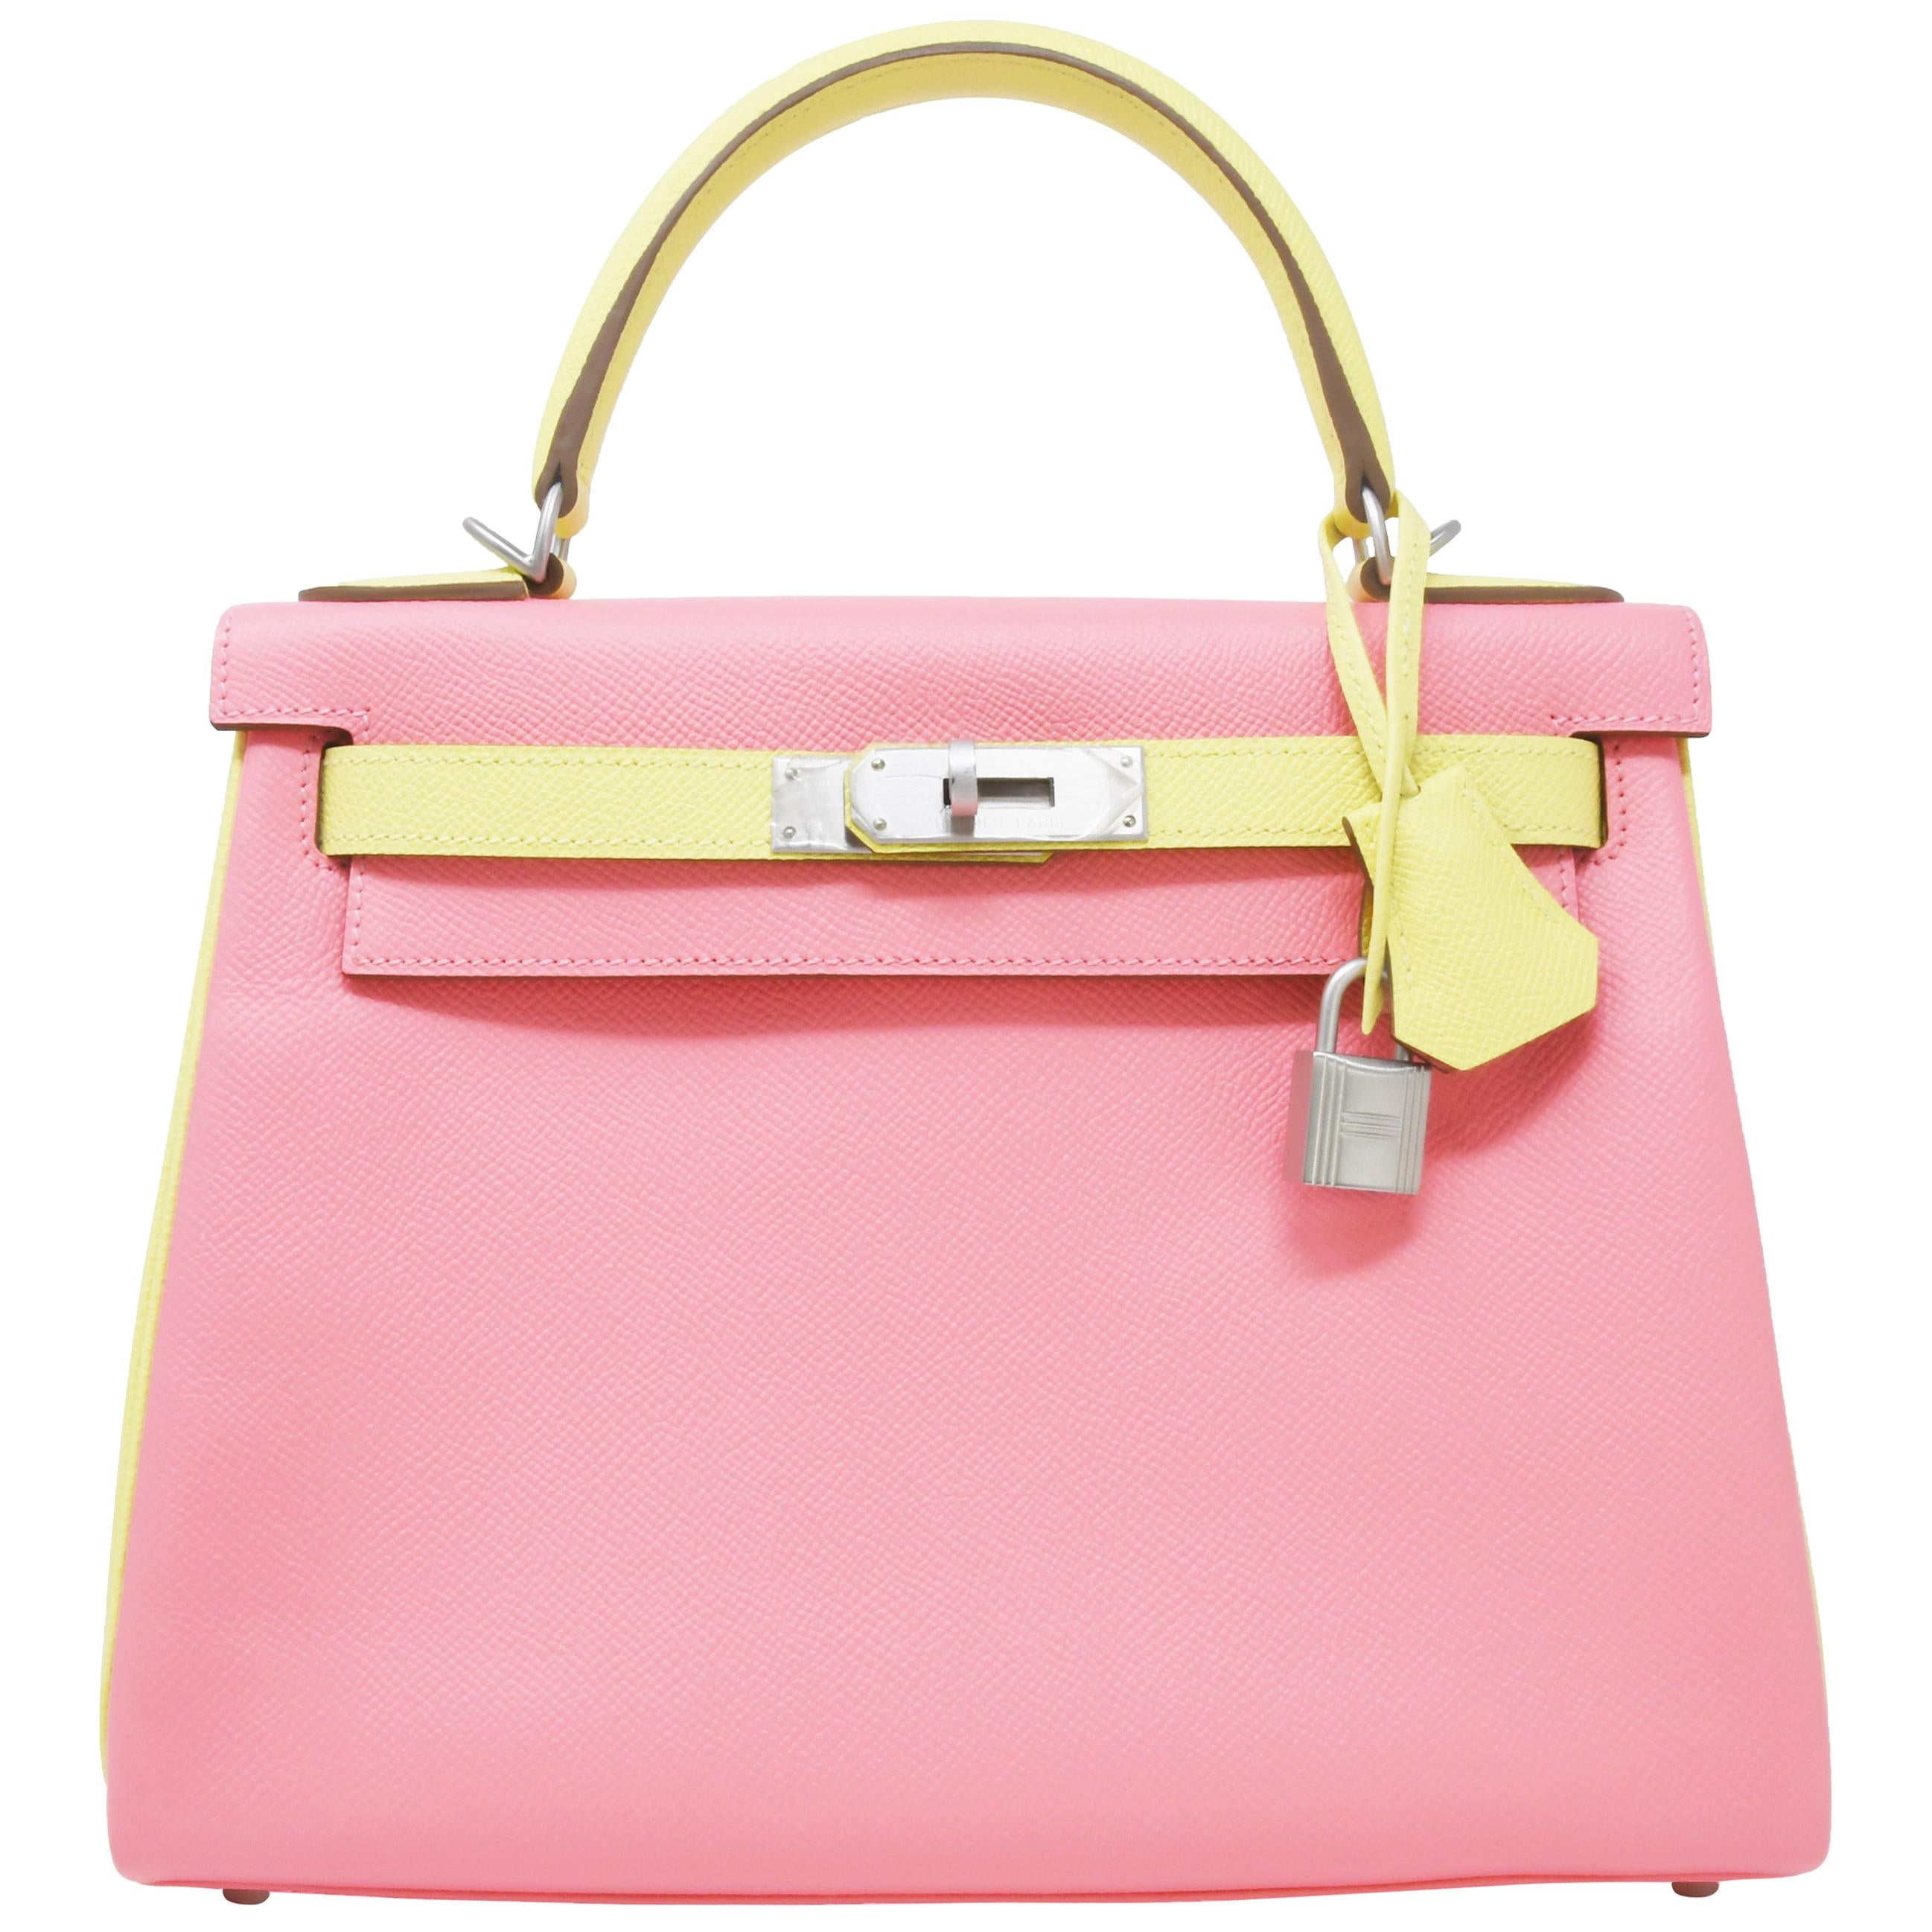  Hermes Kelly Bi-Color Jaune Poussin and Rose Confetti PHW For Sale